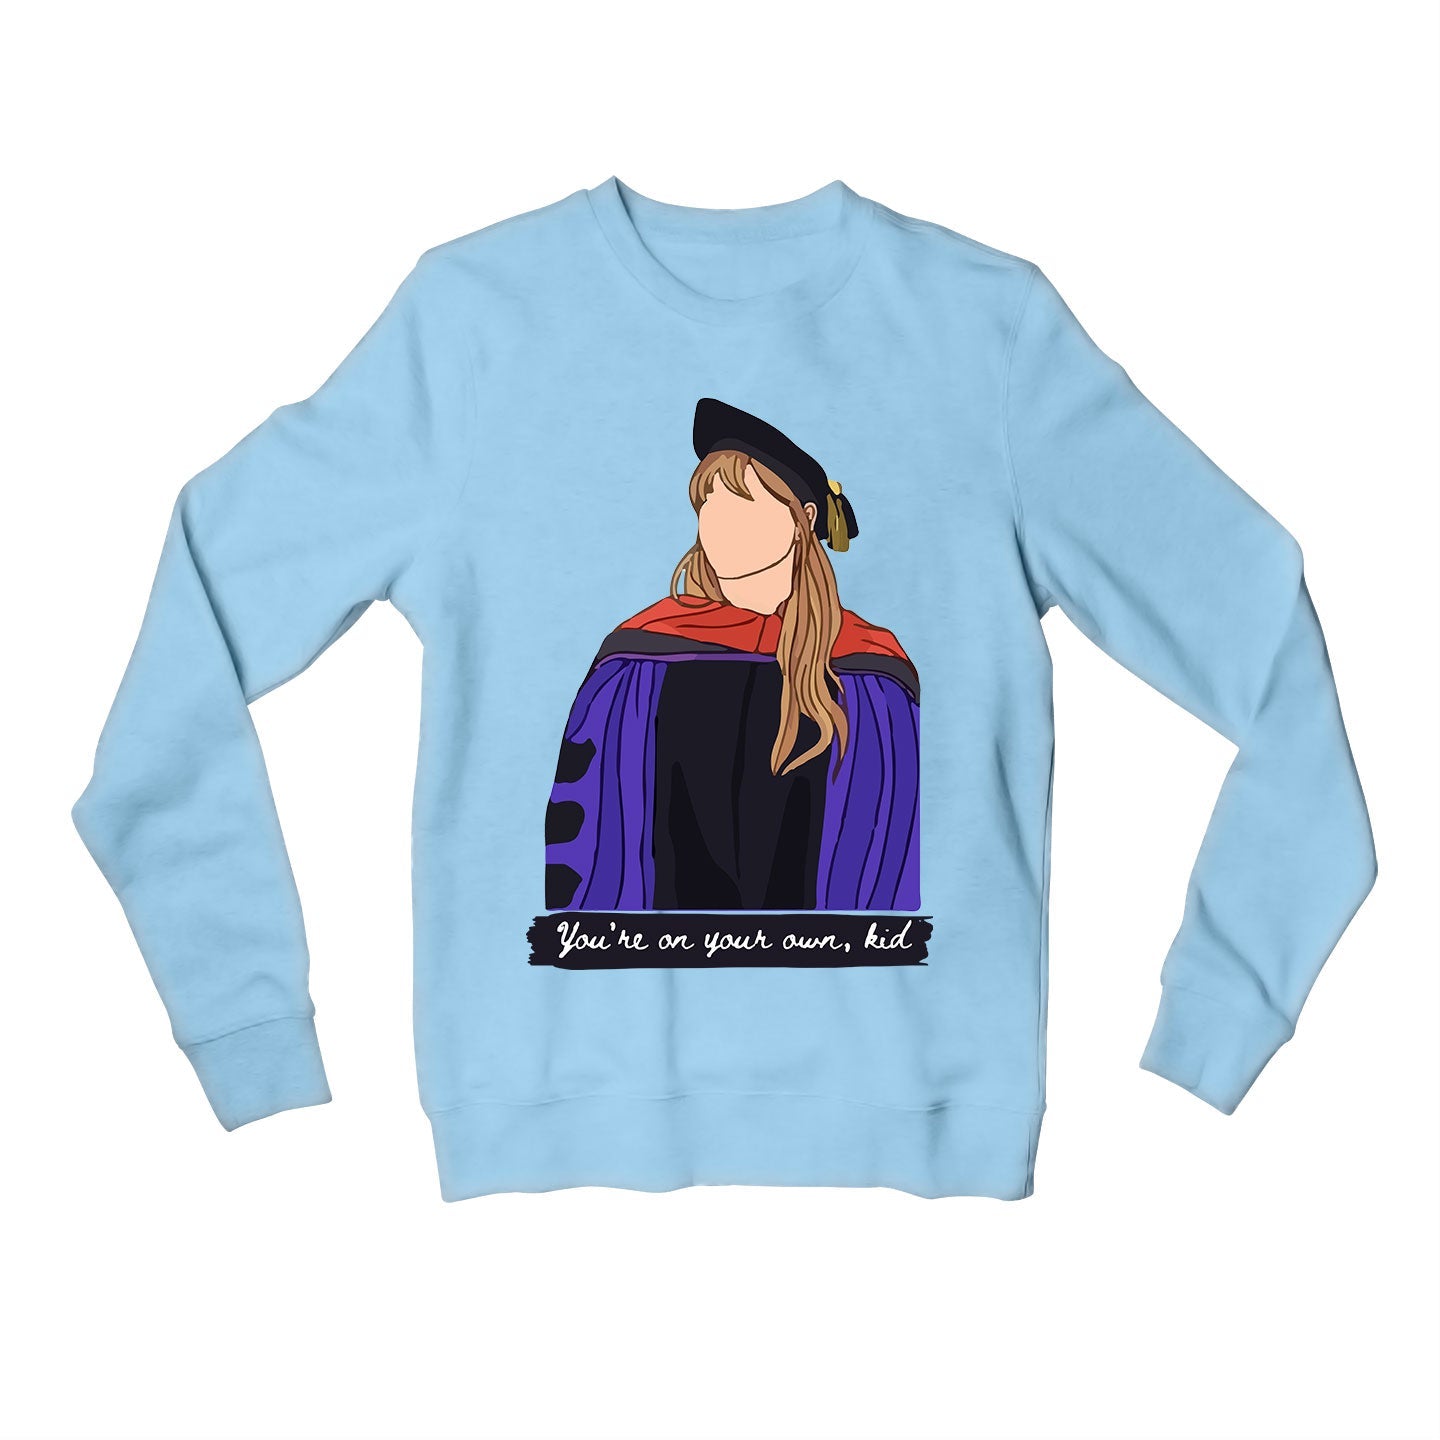 taylor swift you're on your own kid sweatshirt upper winterwear music band buy online united states of america usa the banyan tee tbt men women girls boys unisex baby blue 